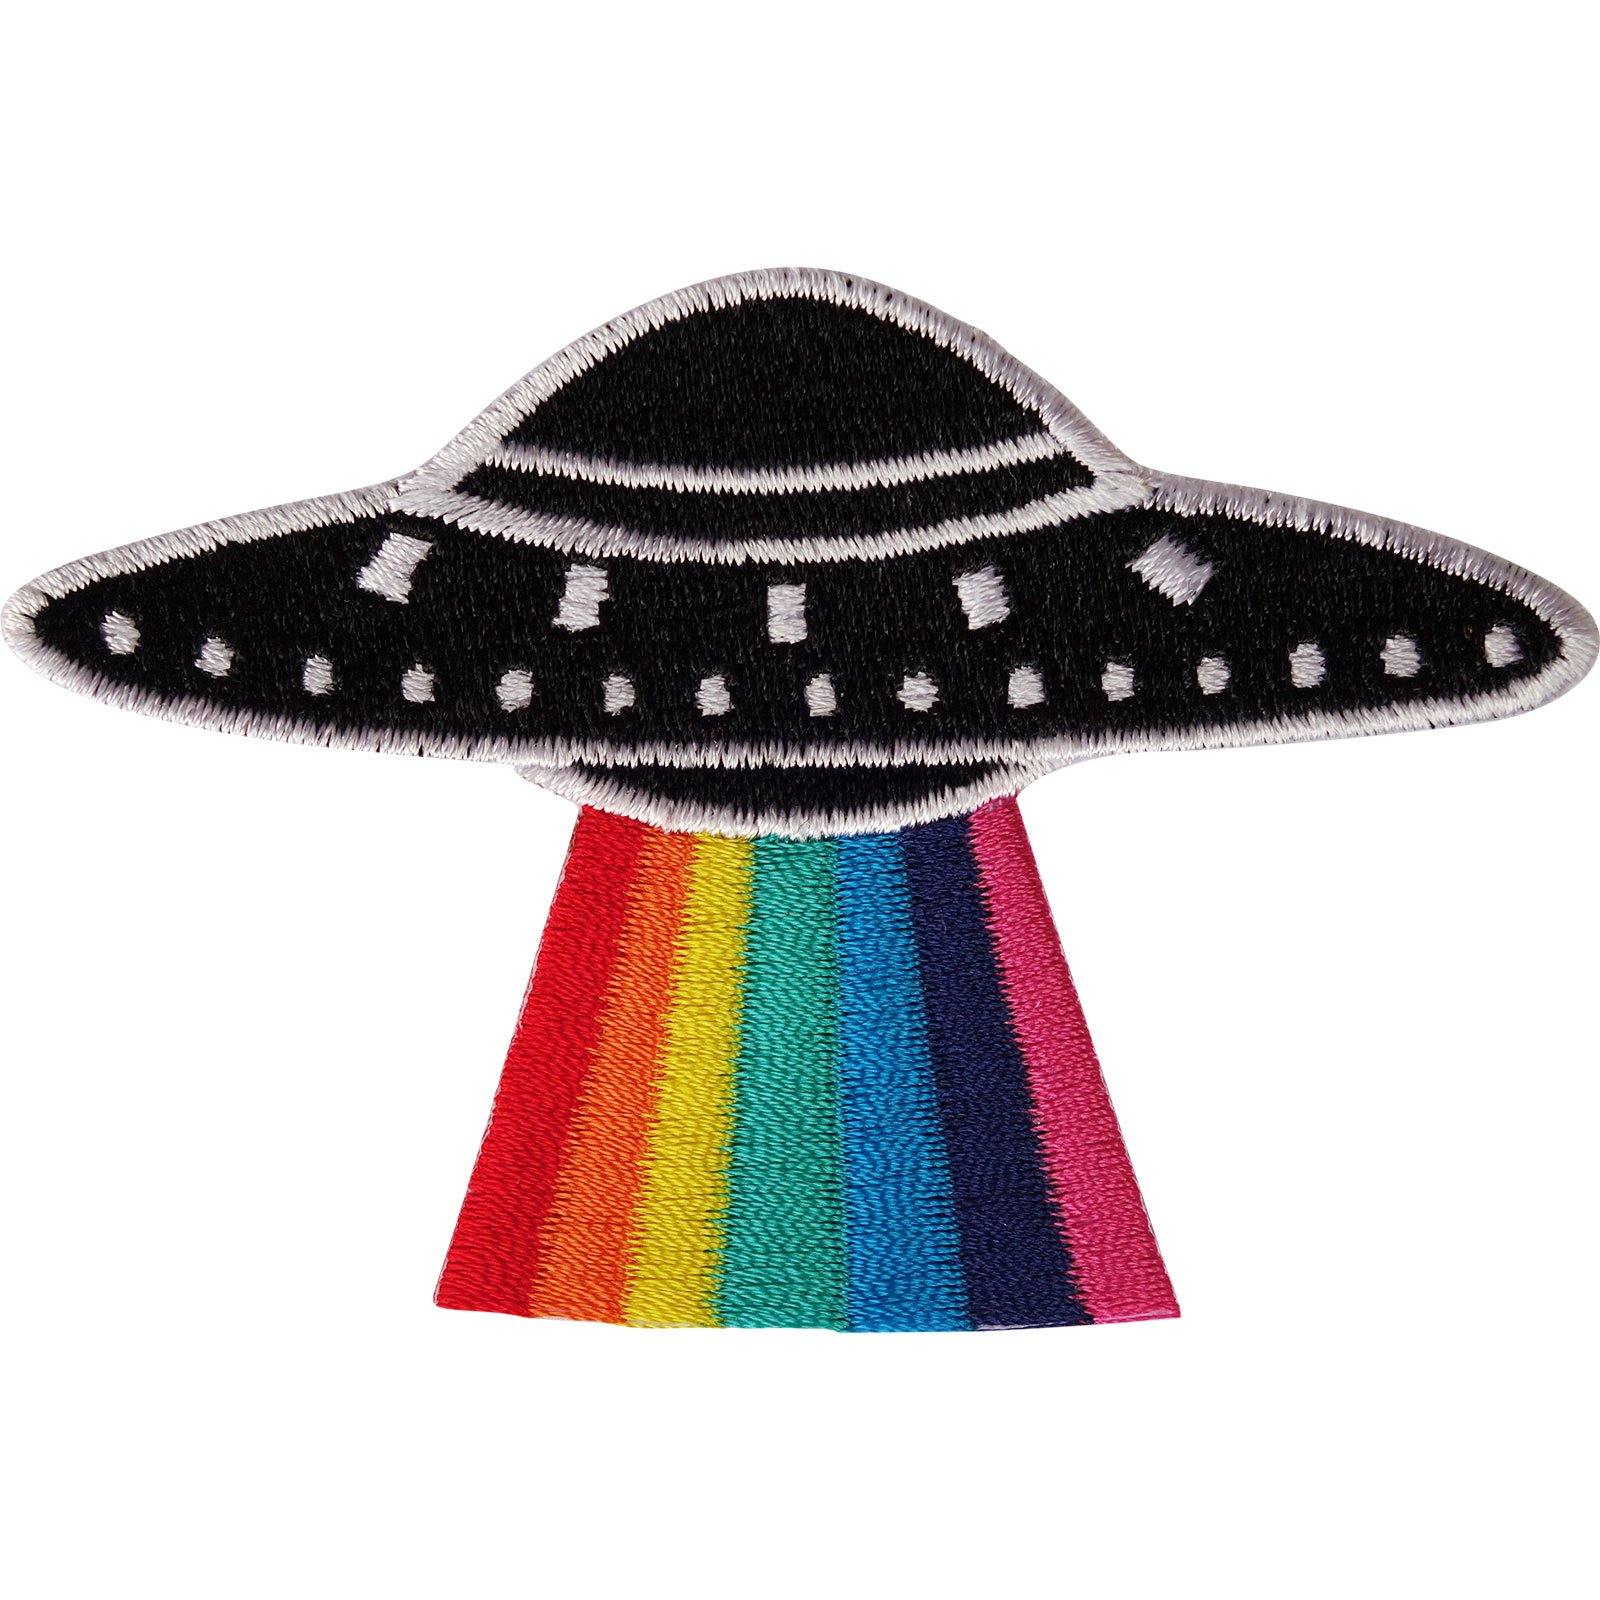 Flying Saucer Rainbow Patch Iron Sew On Alien NASA Space UFO Embroidered Badge